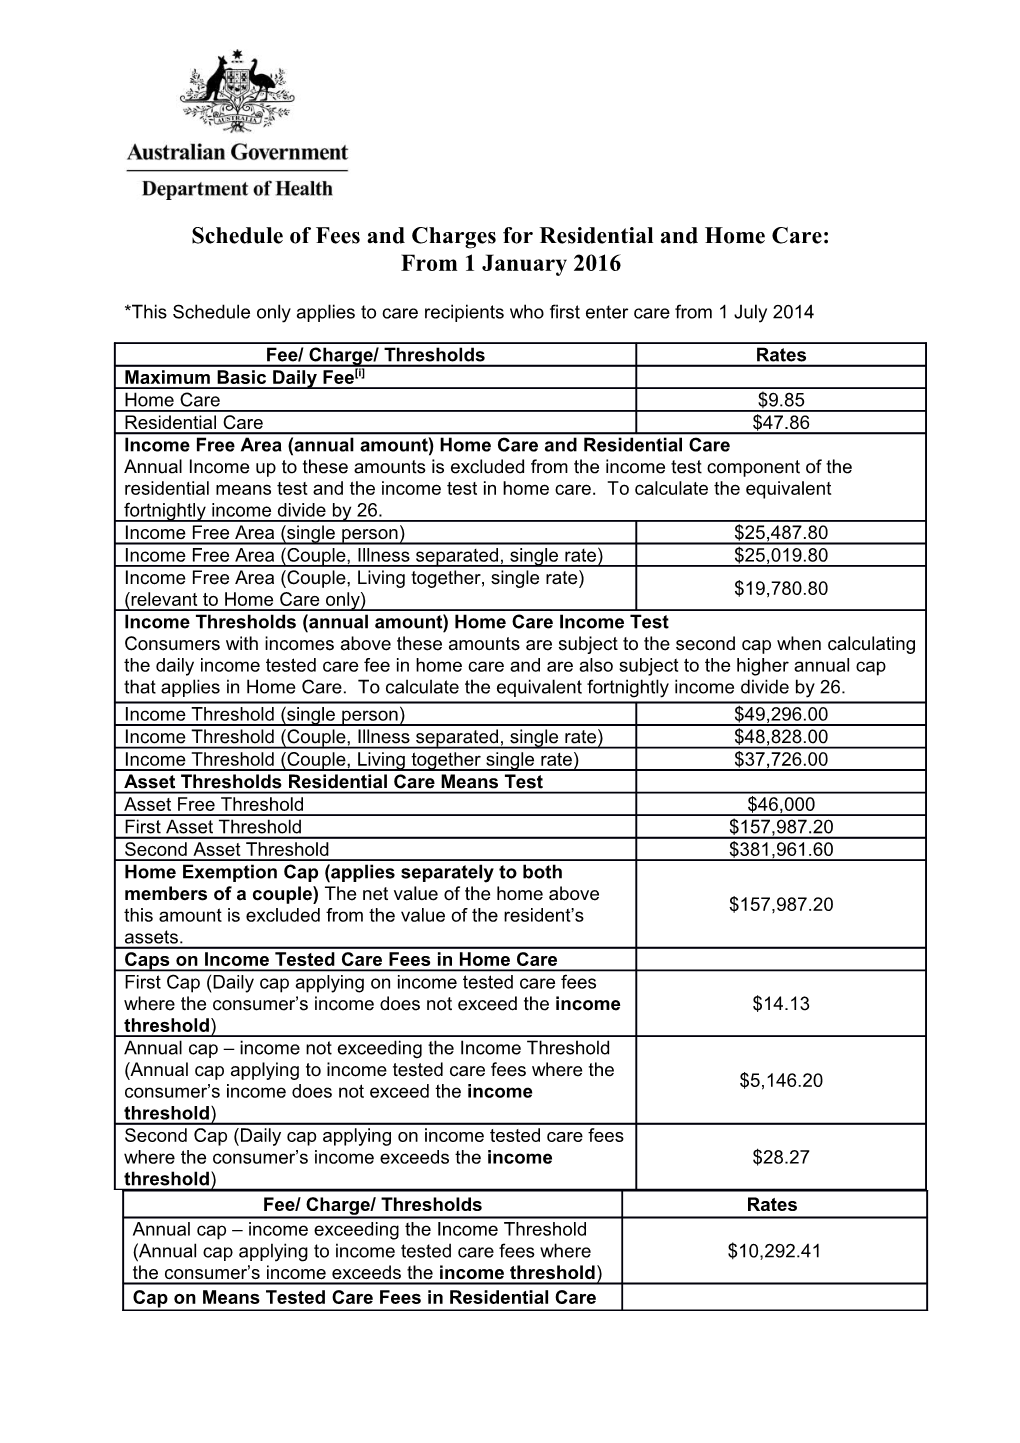 Schedule of Fees and Charges for Post Reform Residents